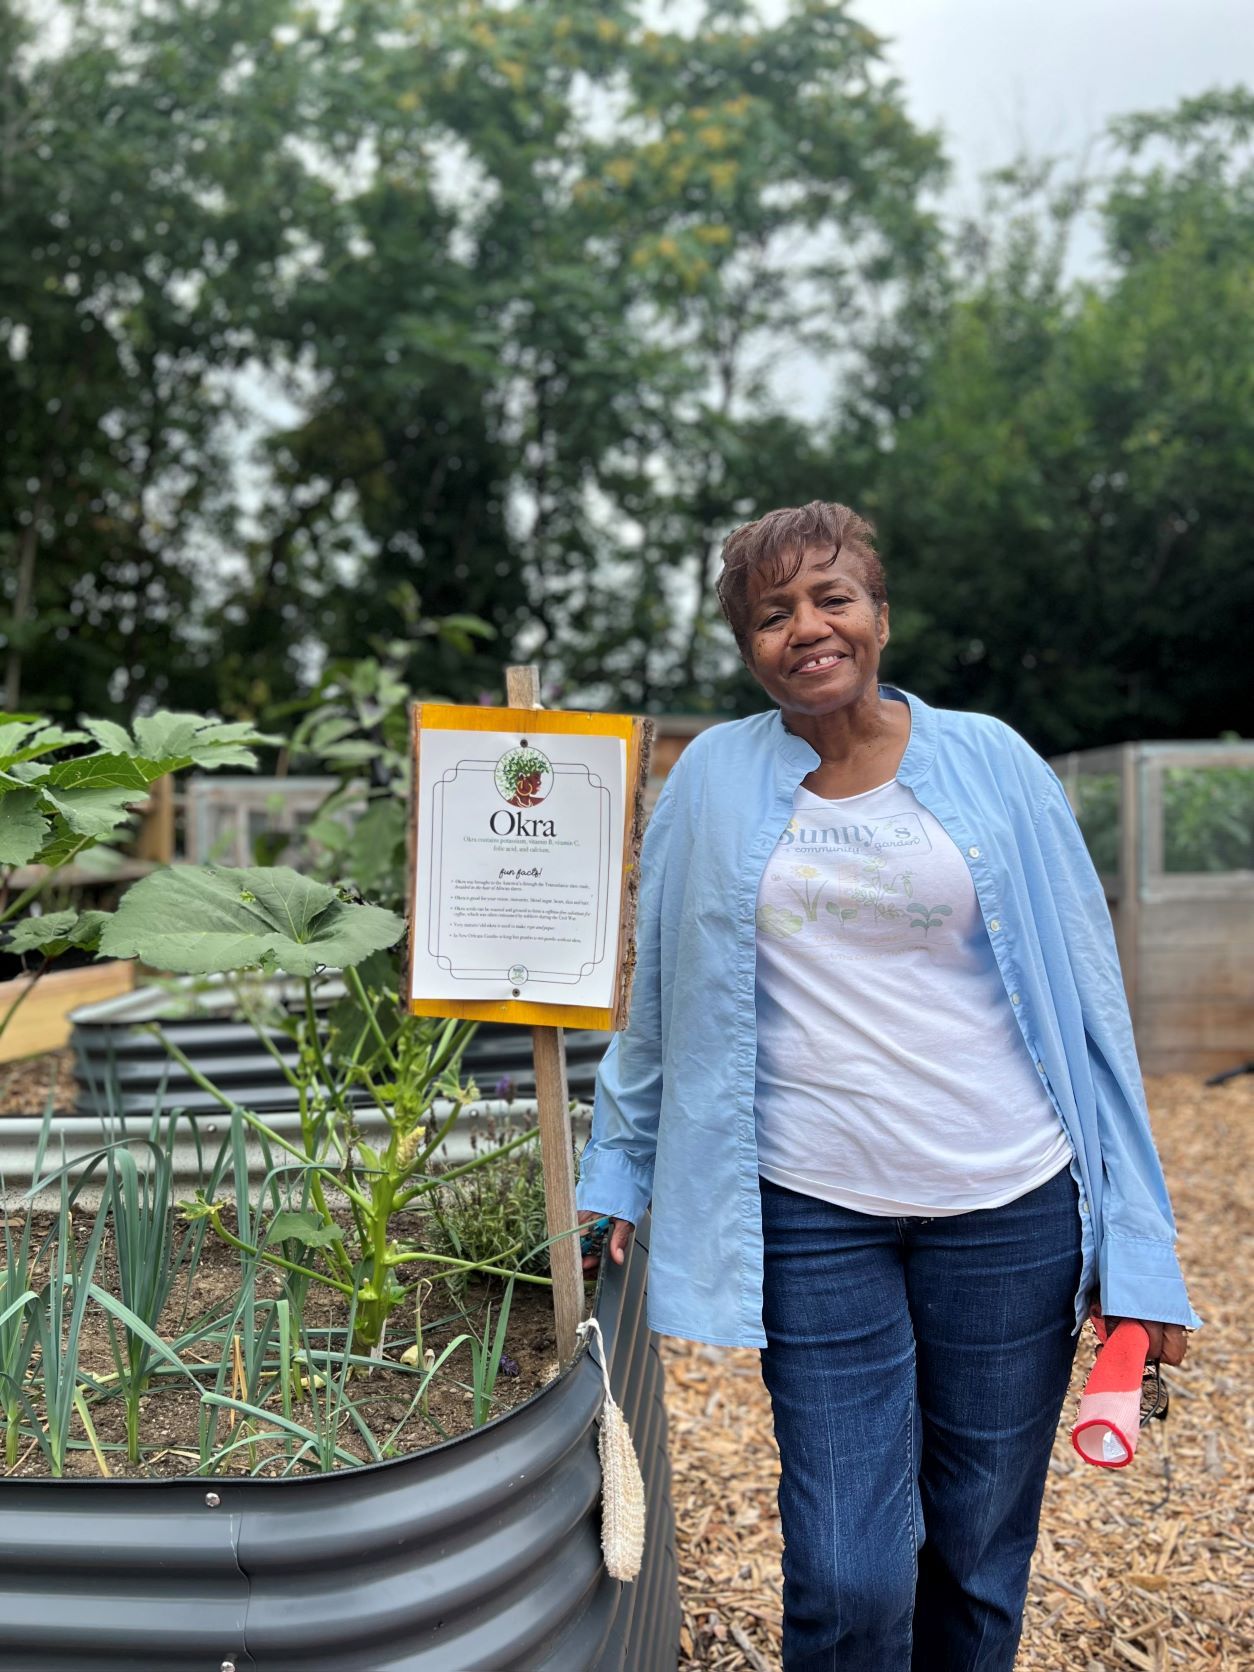 Sheila Petite standing next to an Okra raised garden bed at Sunny's community garden.